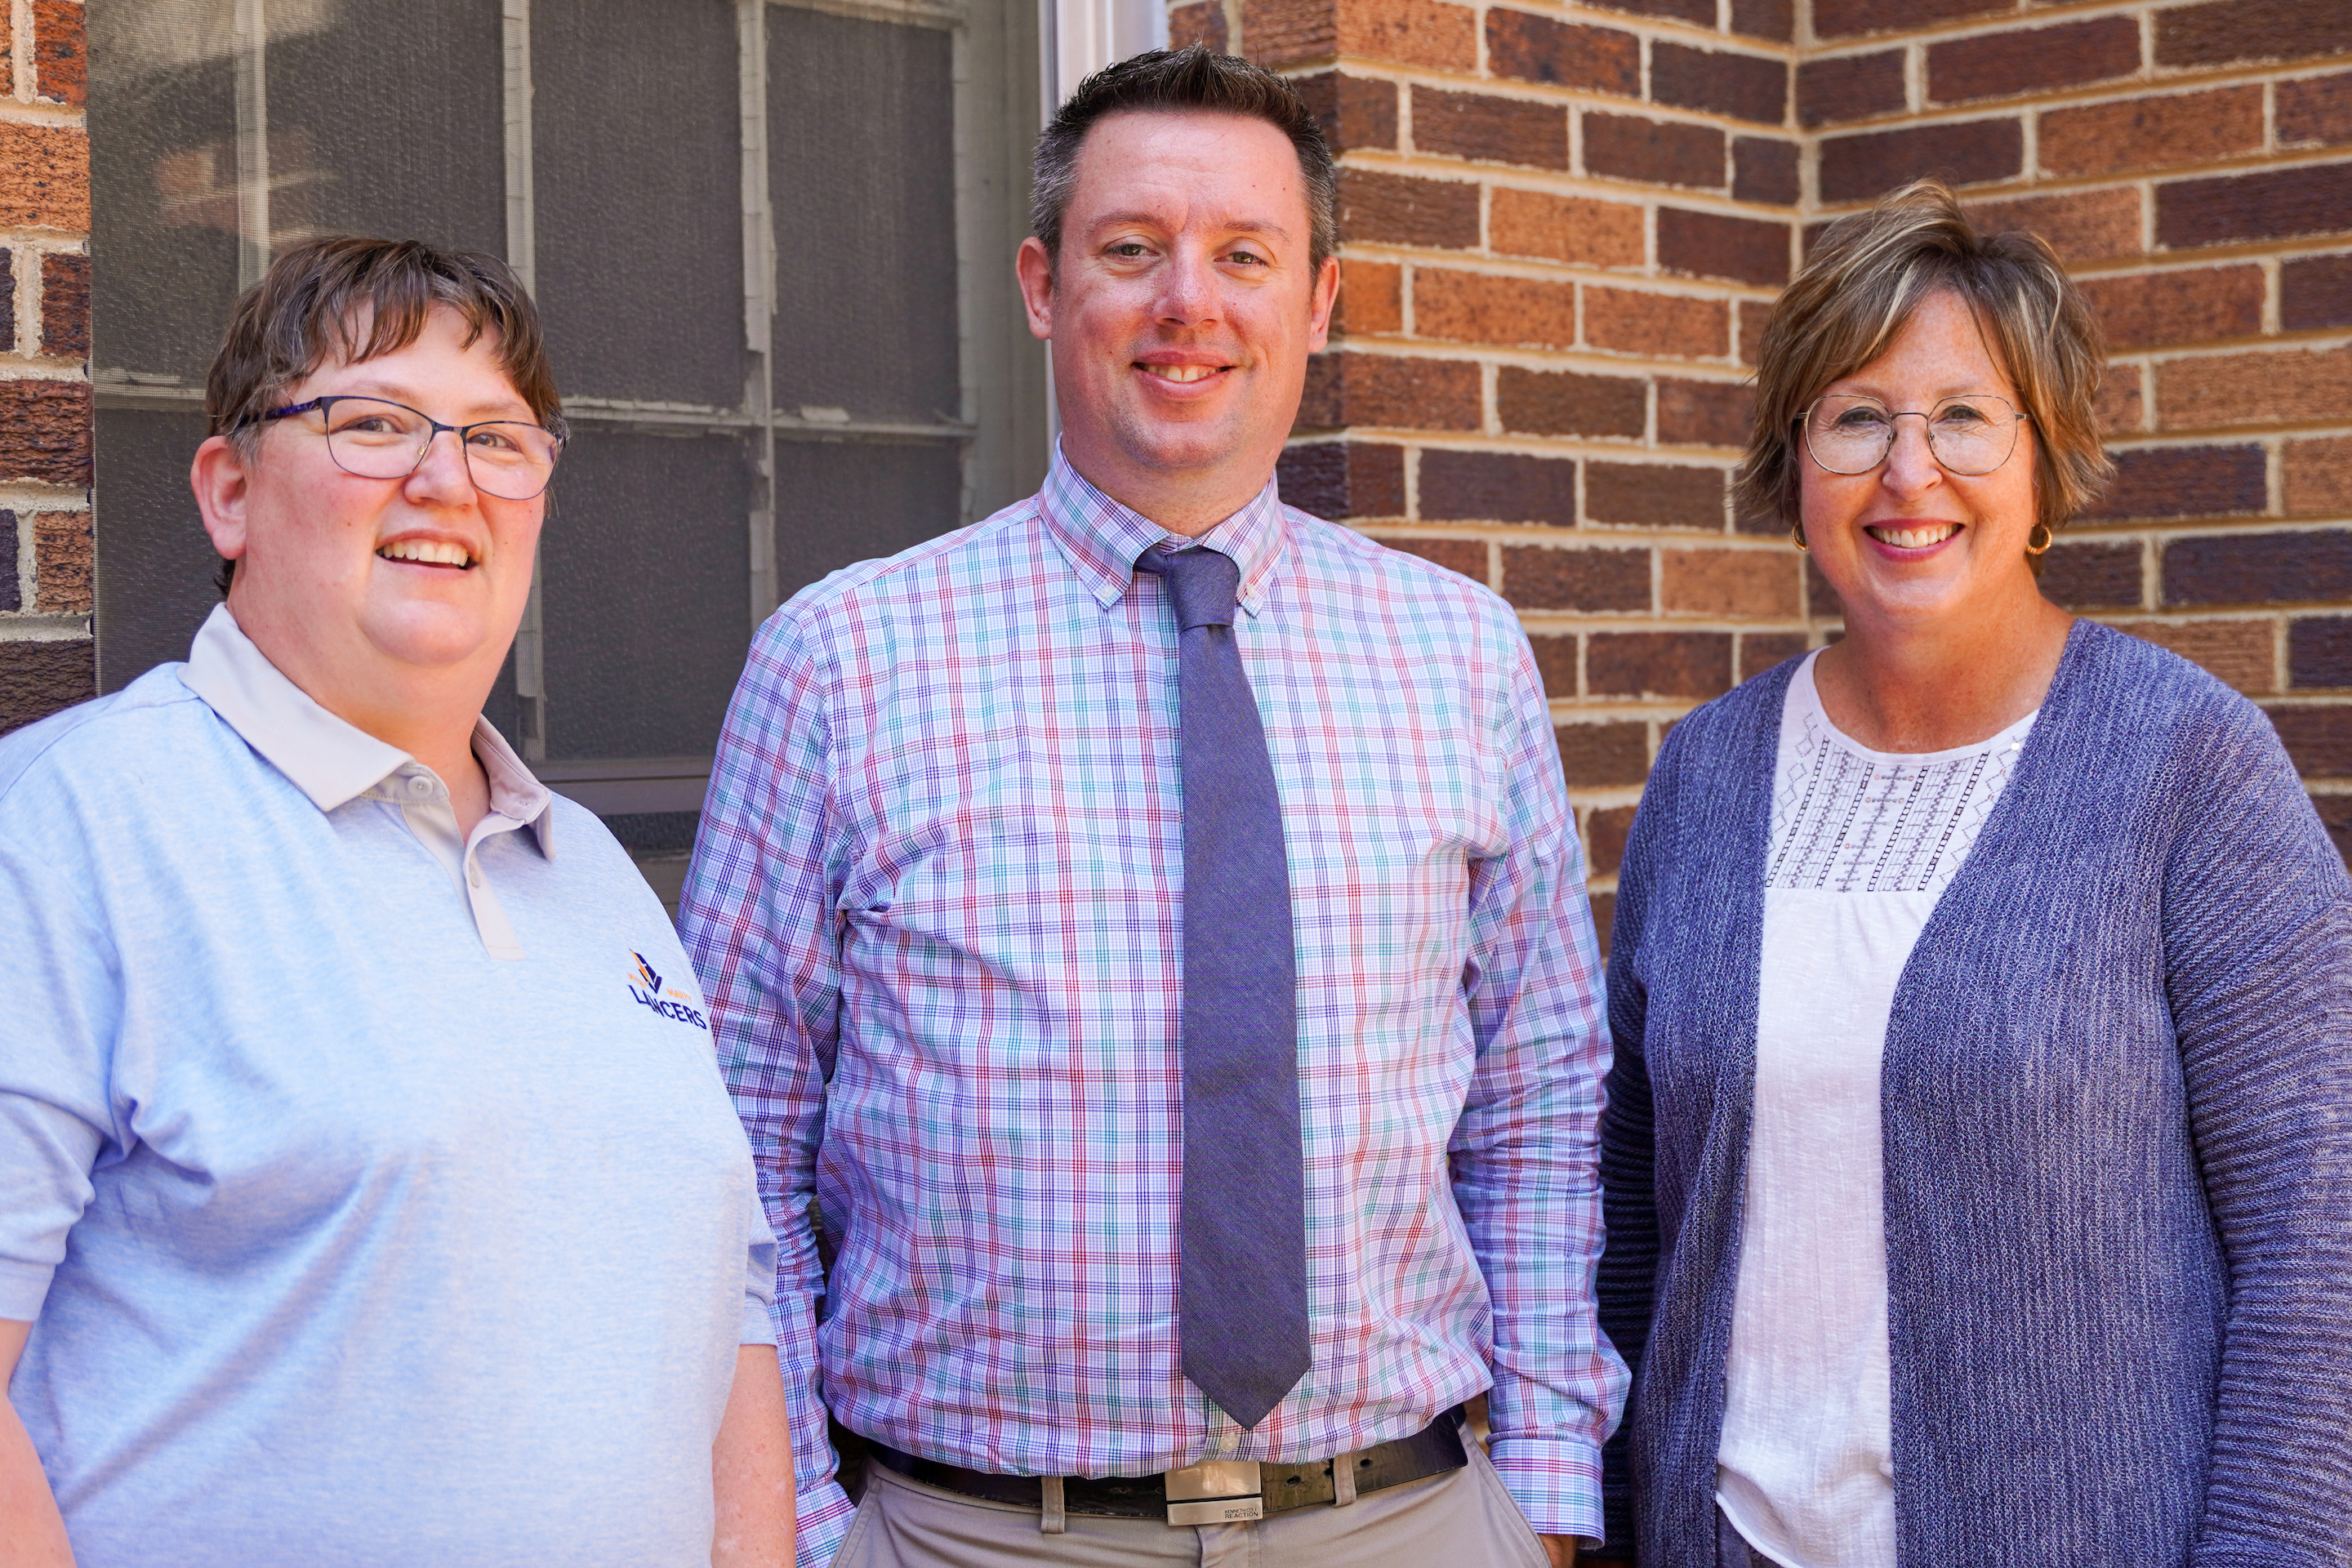 Three faculty members welcomed at Mount Marty University for new academic year